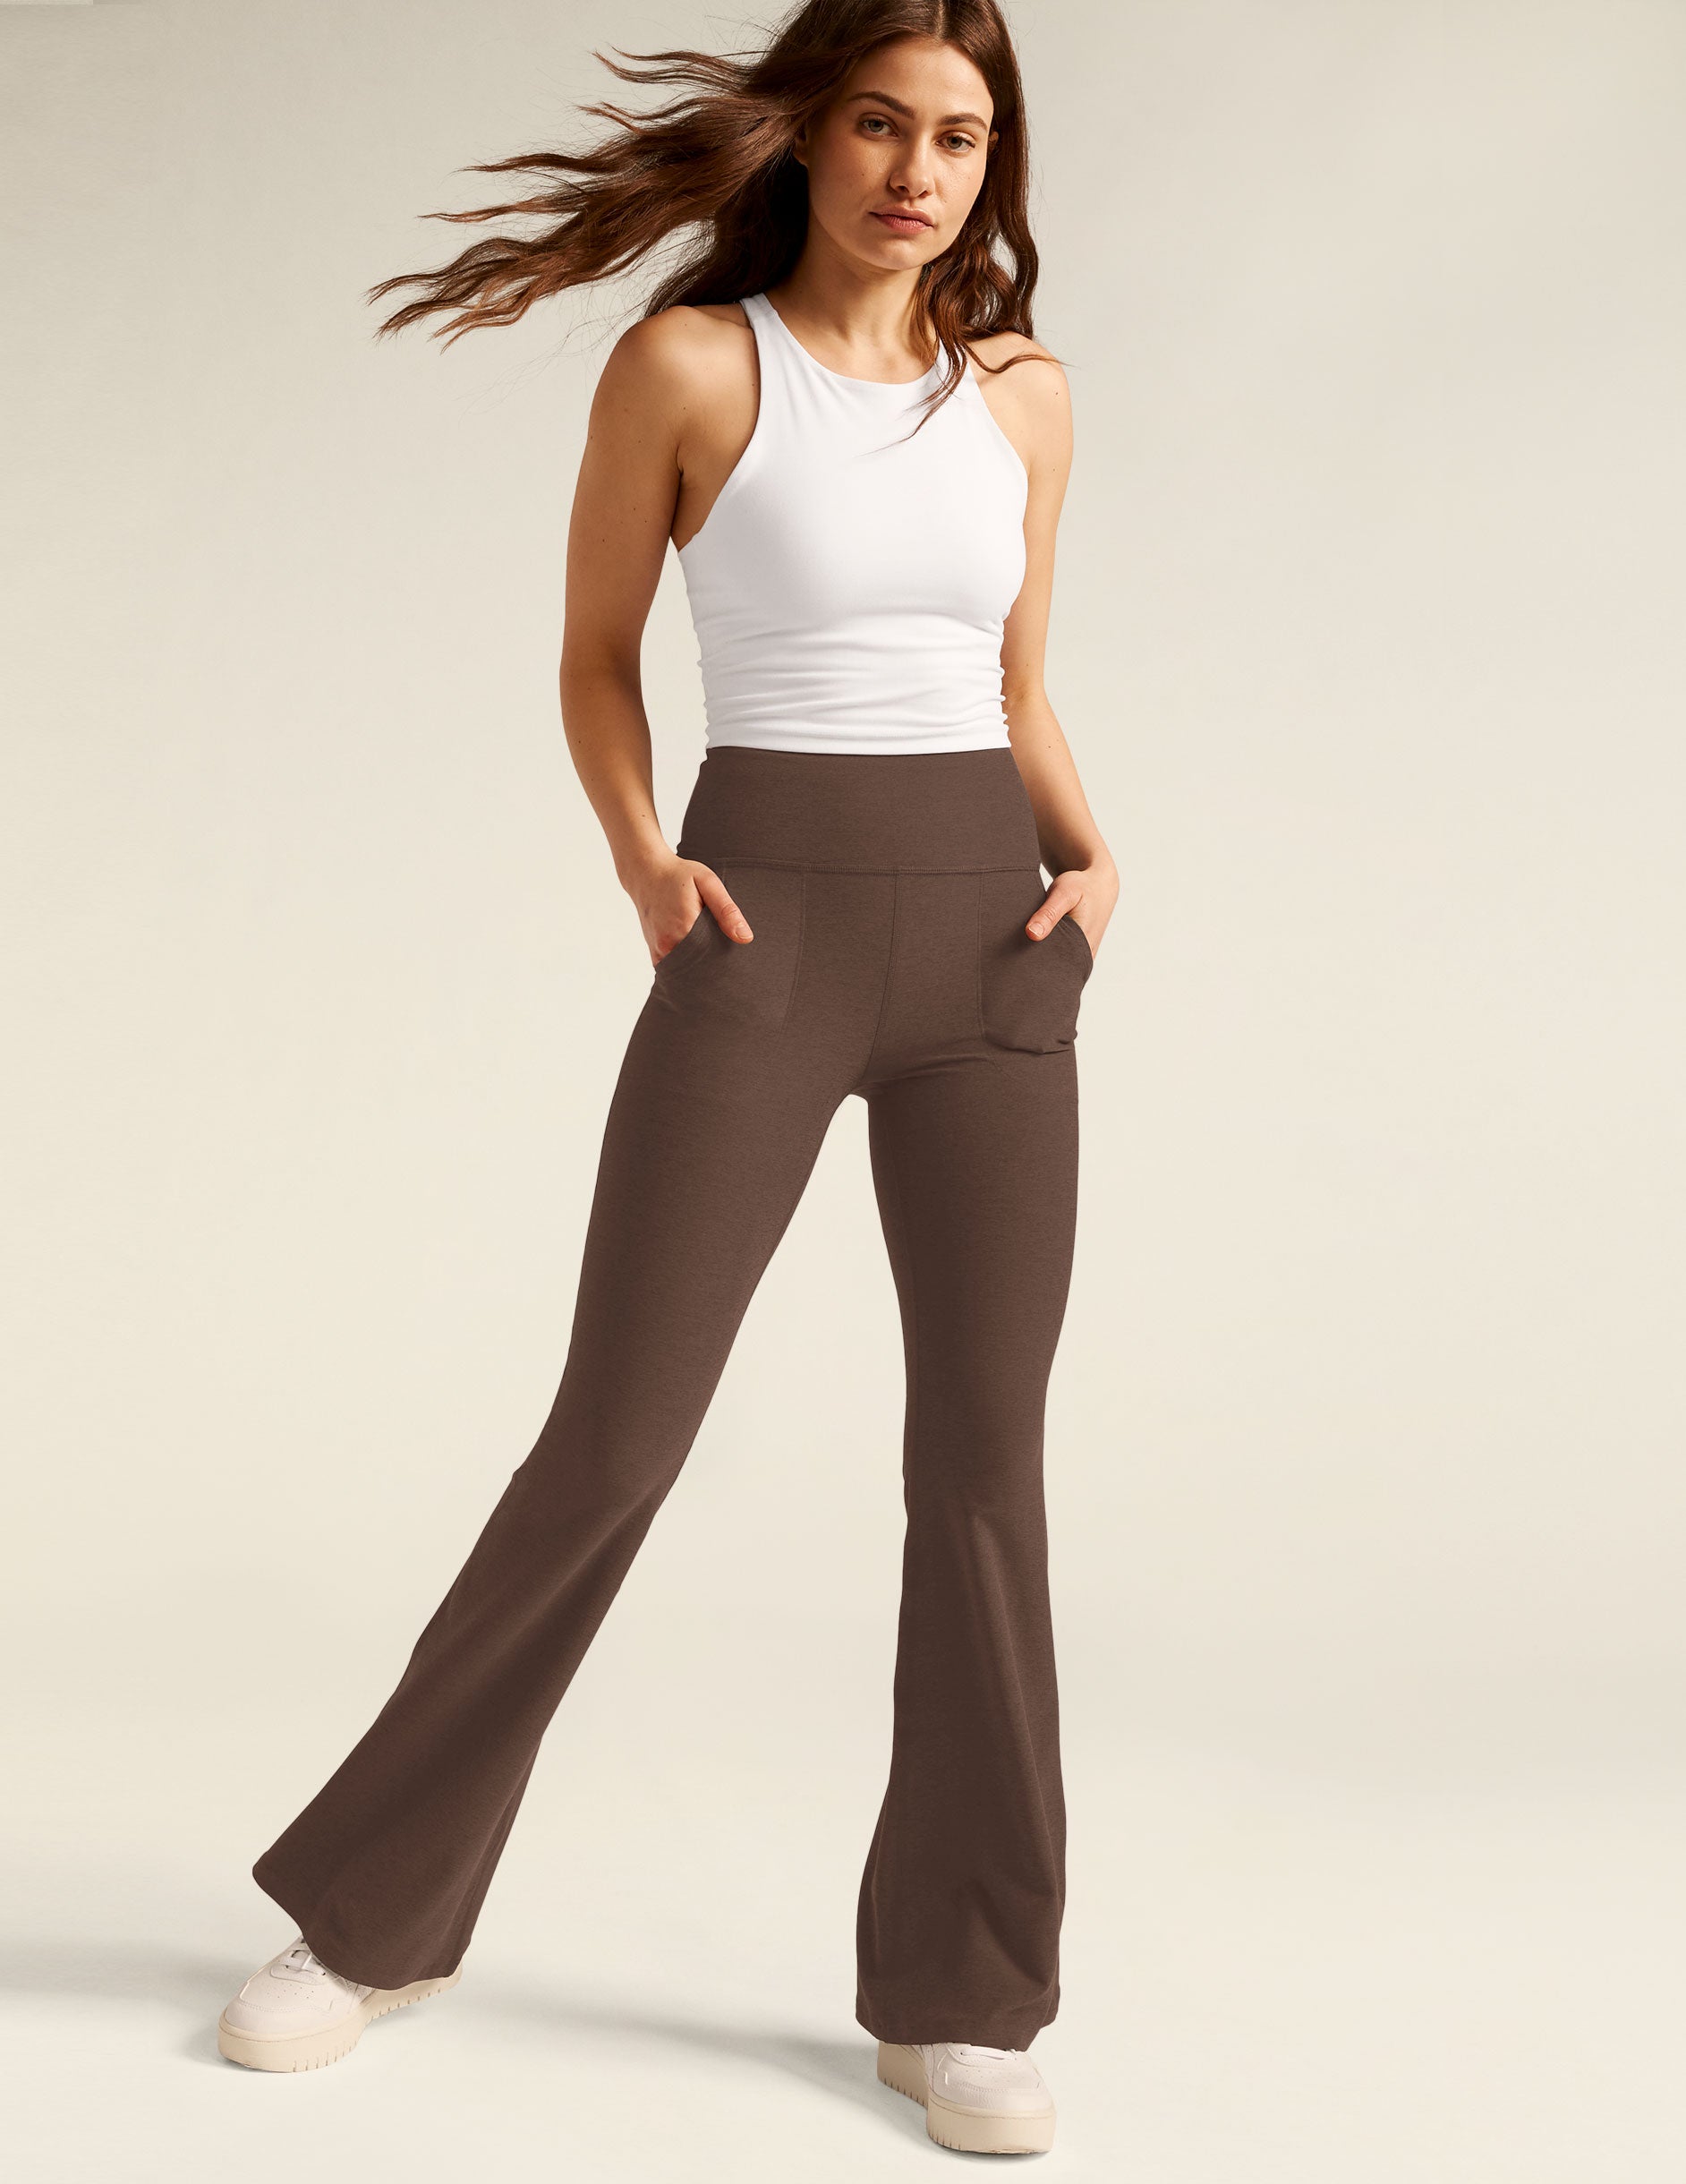 brown high-waisted flare pants with front side pockets. 